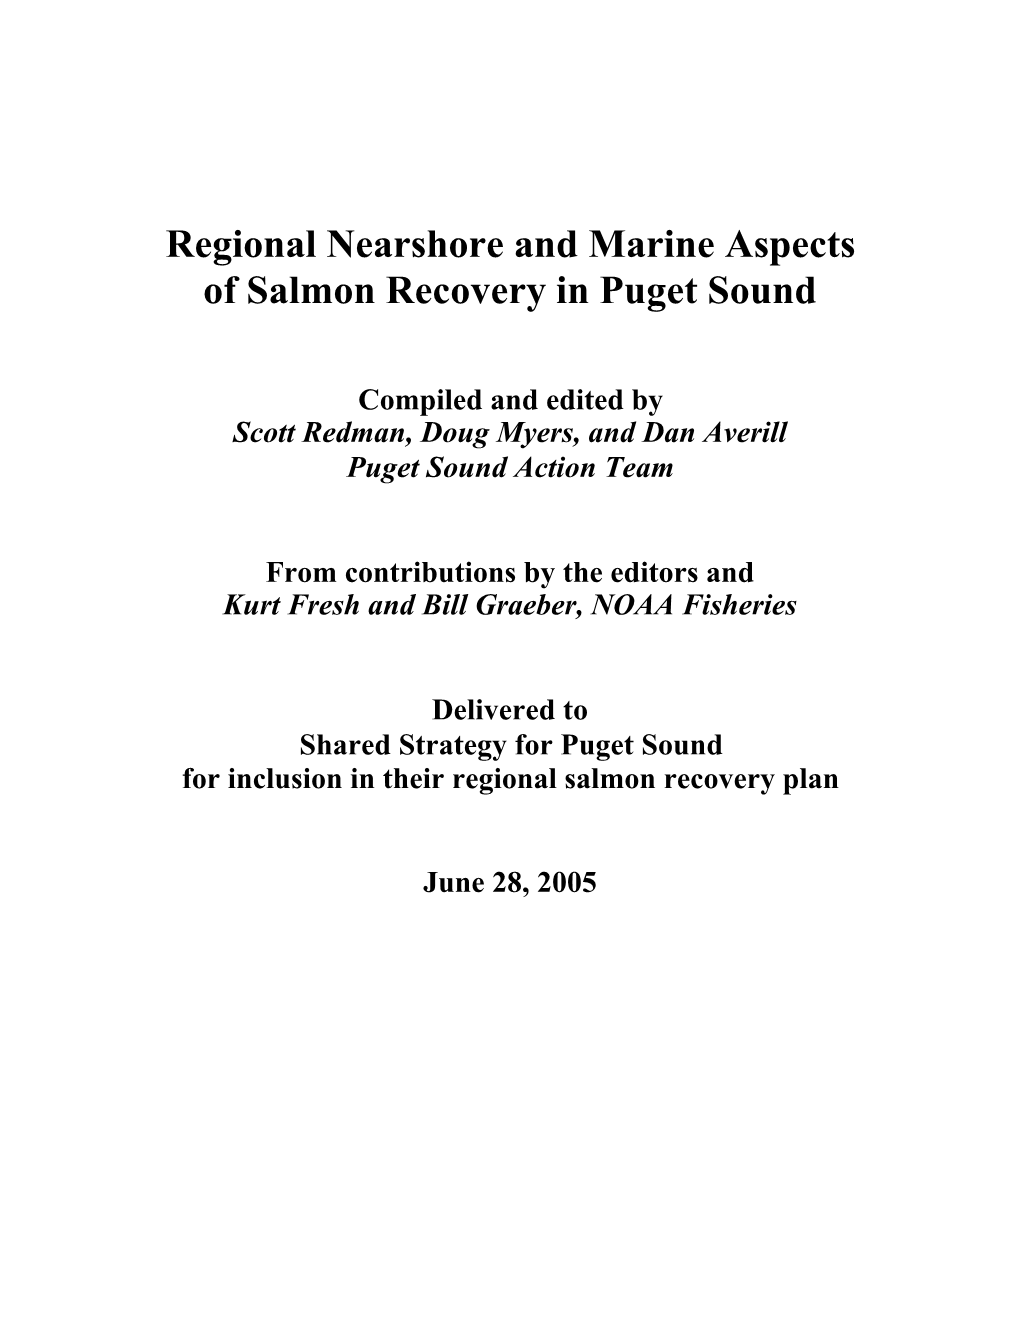 Regional Nearshore and Marine Aspects of Salmon Recovery in Puget Sound